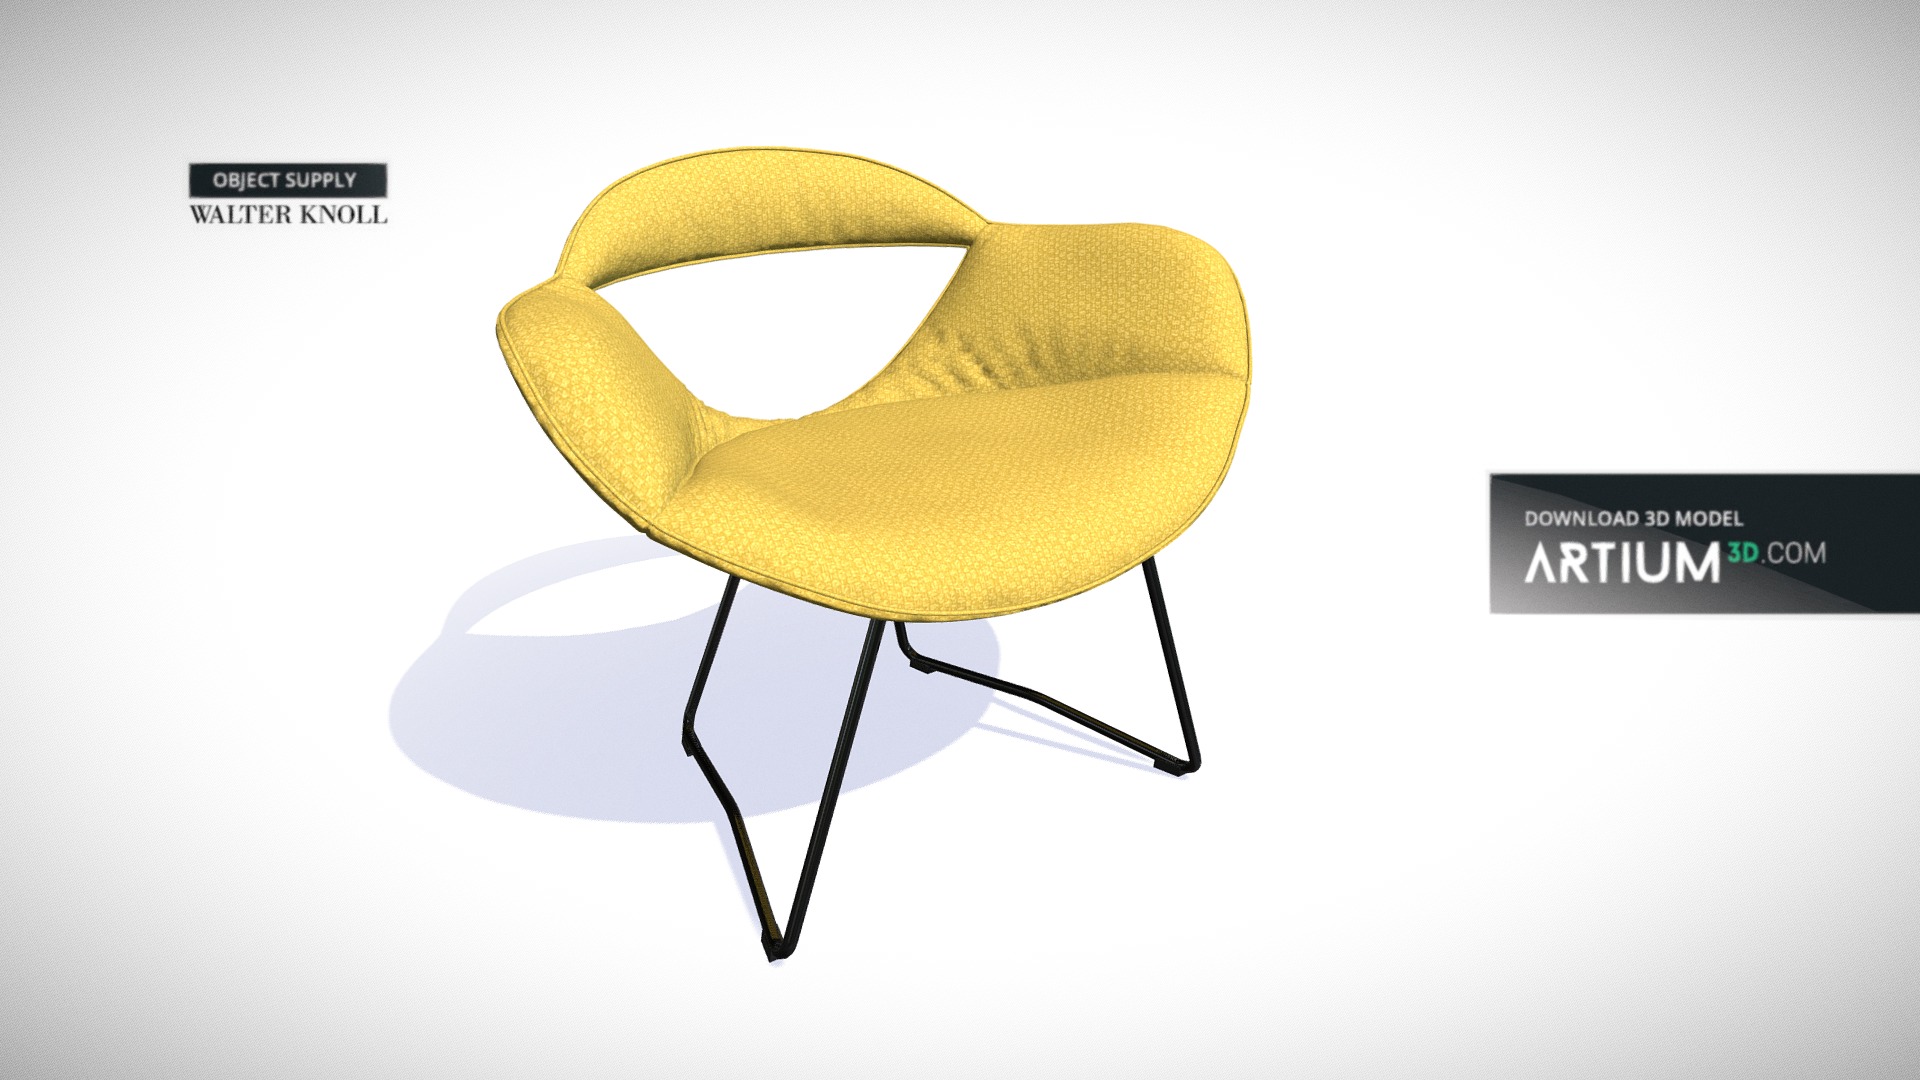 3D model Chair Rumi from Walter Knoll - This is a 3D model of the Chair Rumi from Walter Knoll. The 3D model is about a yellow hat with a black band.